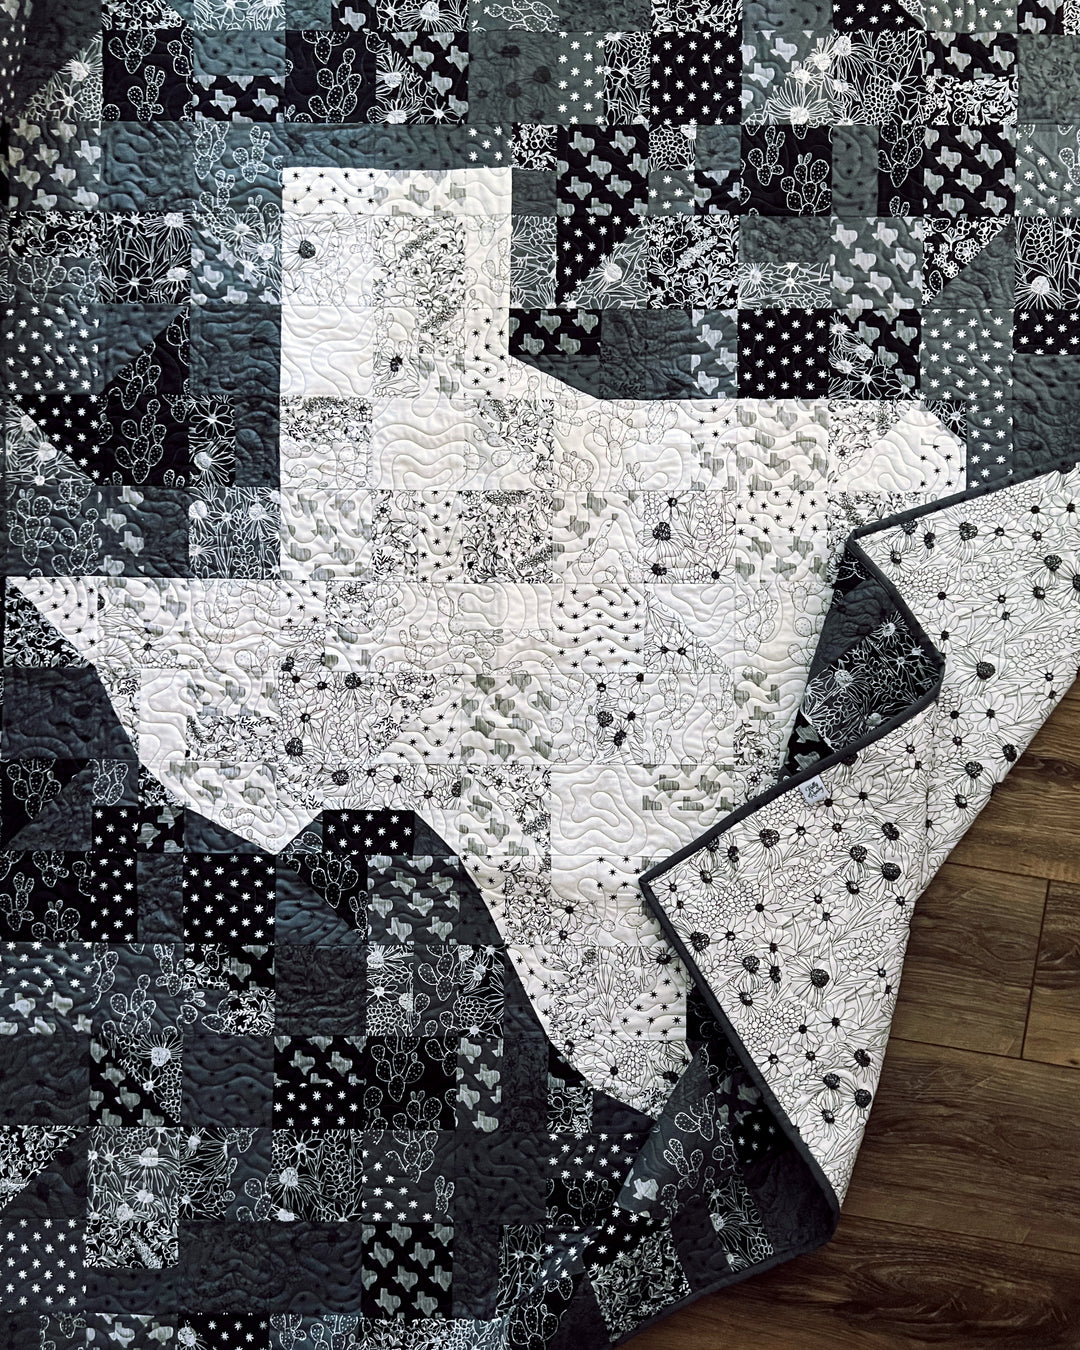 Howdy Texas Quilt by Kelly Renay with Malachite Pantograph